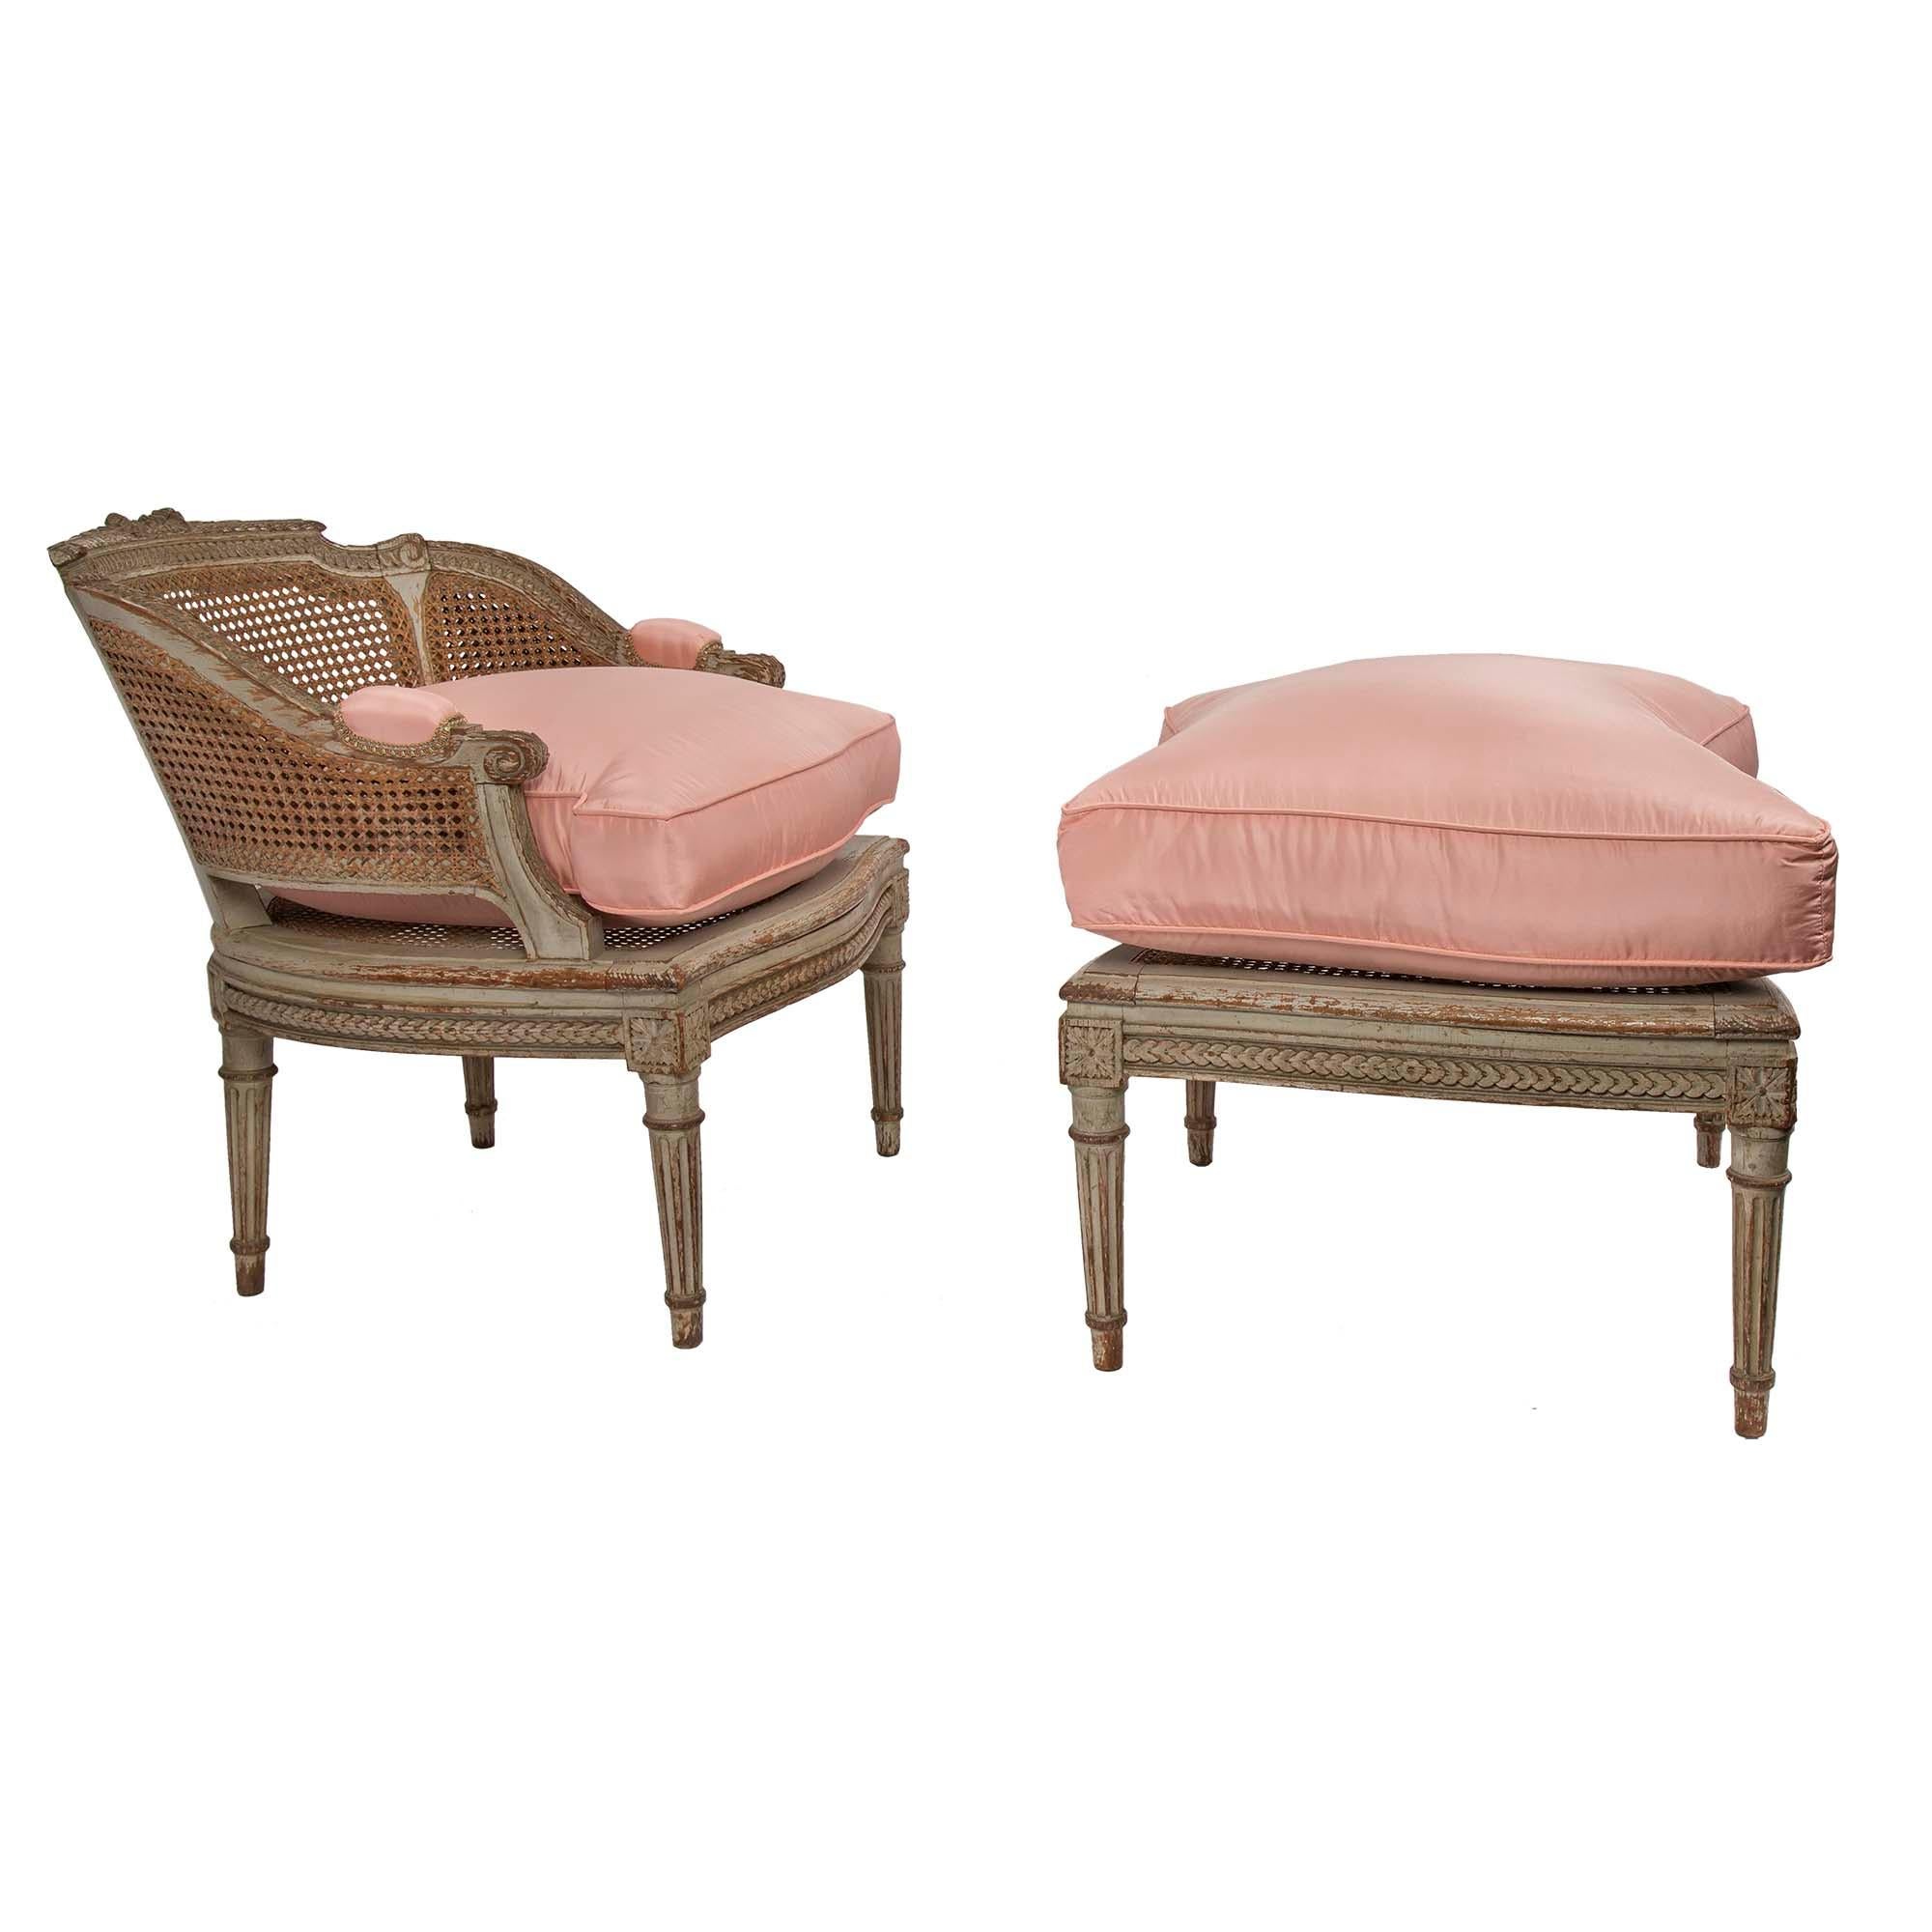 A wonderful 19th century French Louis XVI st. patinated and cane Duchesse Brisée The three piece lady's seating group is raised by tapered fluted legs topped by corner block rosettes. The frieze is finely carved with a foliate band. Each caned